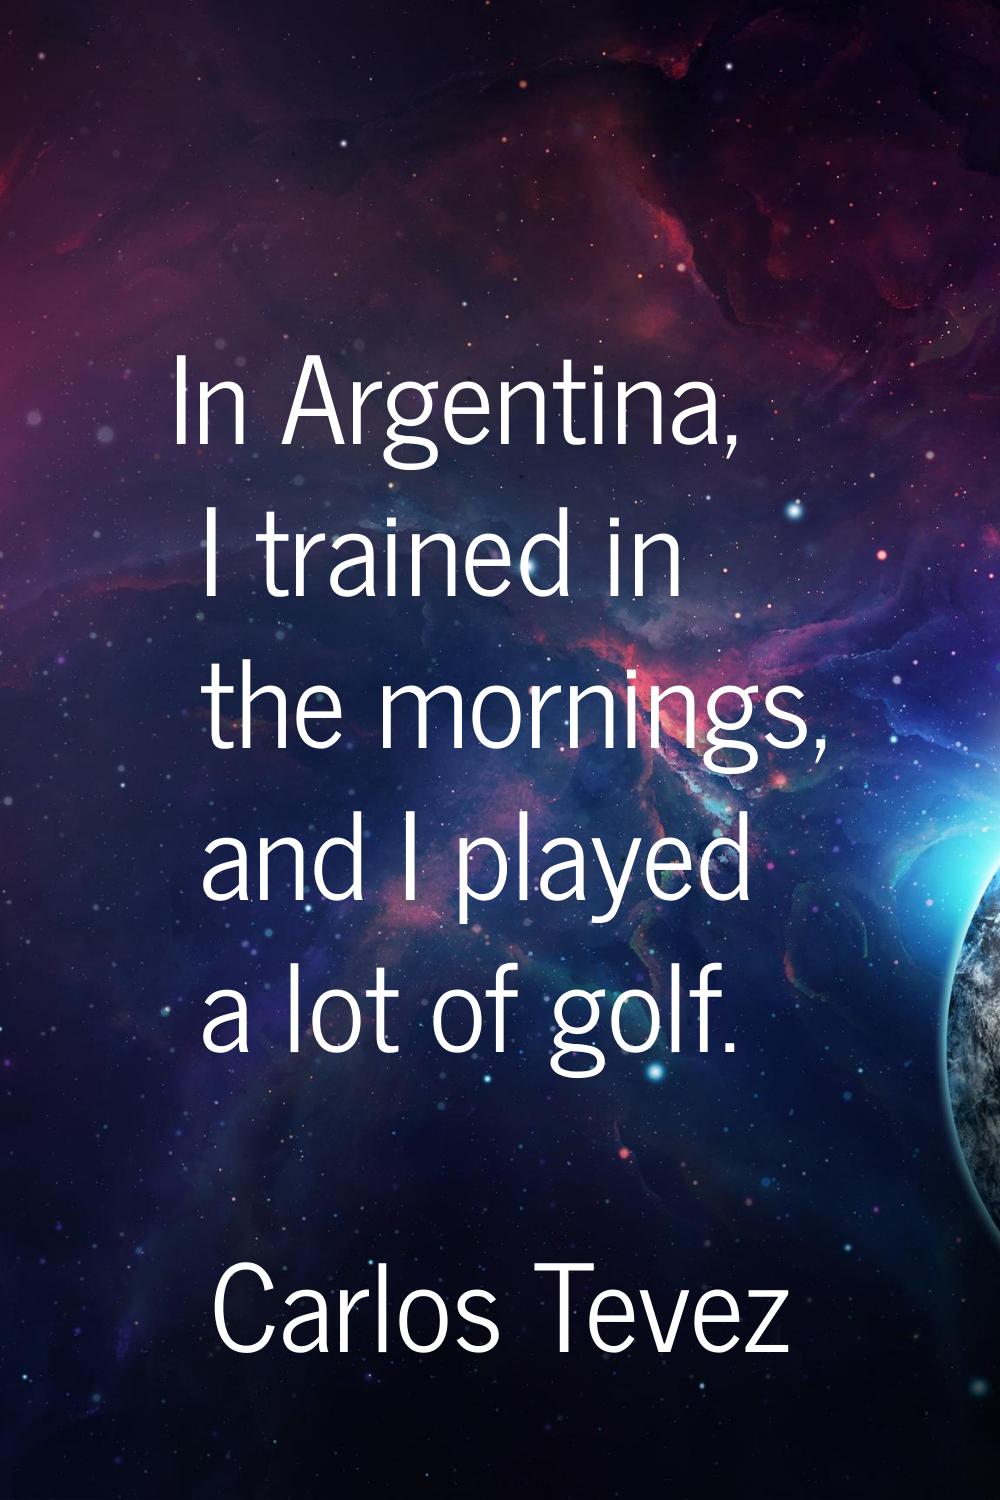 In Argentina, I trained in the mornings, and I played a lot of golf.